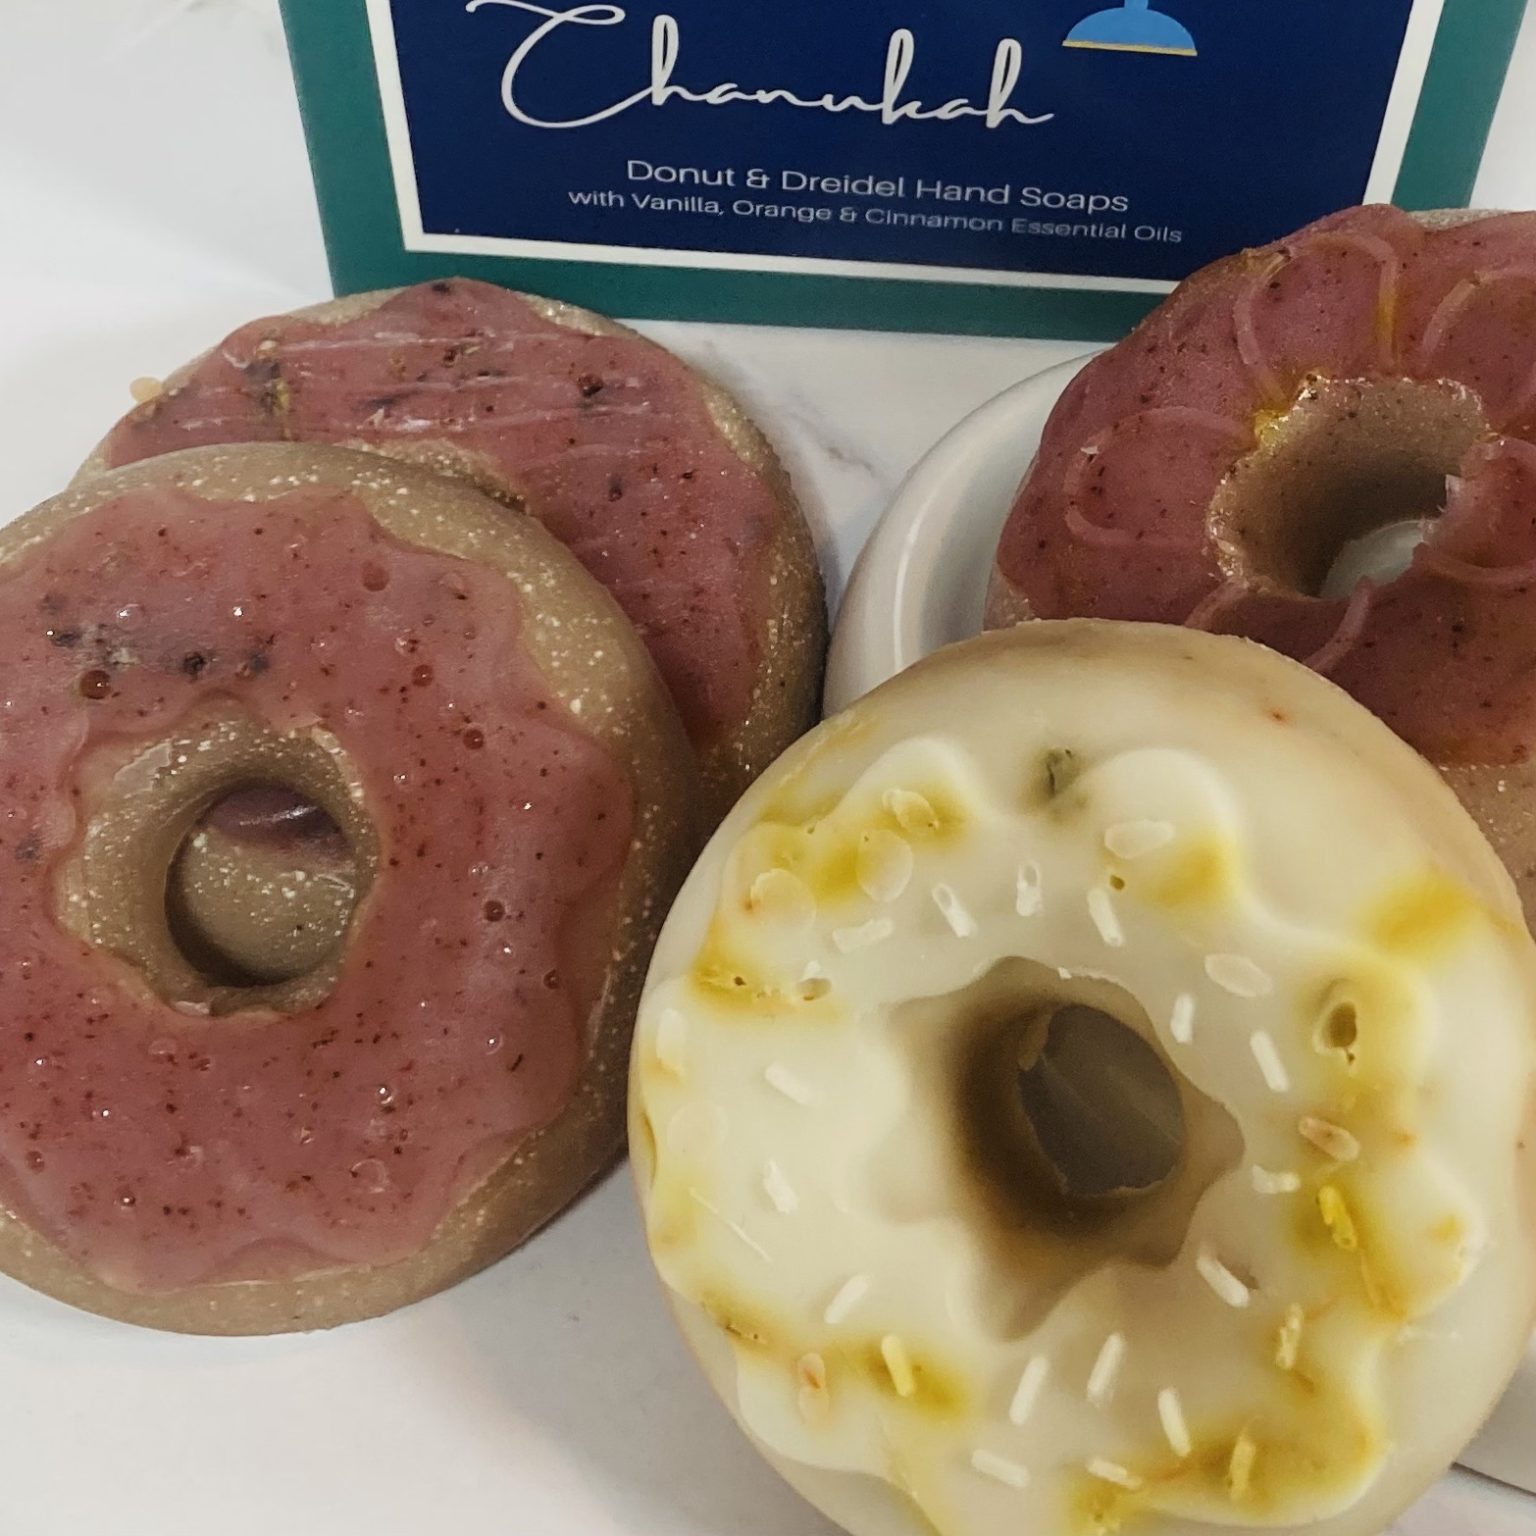 brown and red, and tan and yellow donut soaps - they are the type with the whole in the middle.